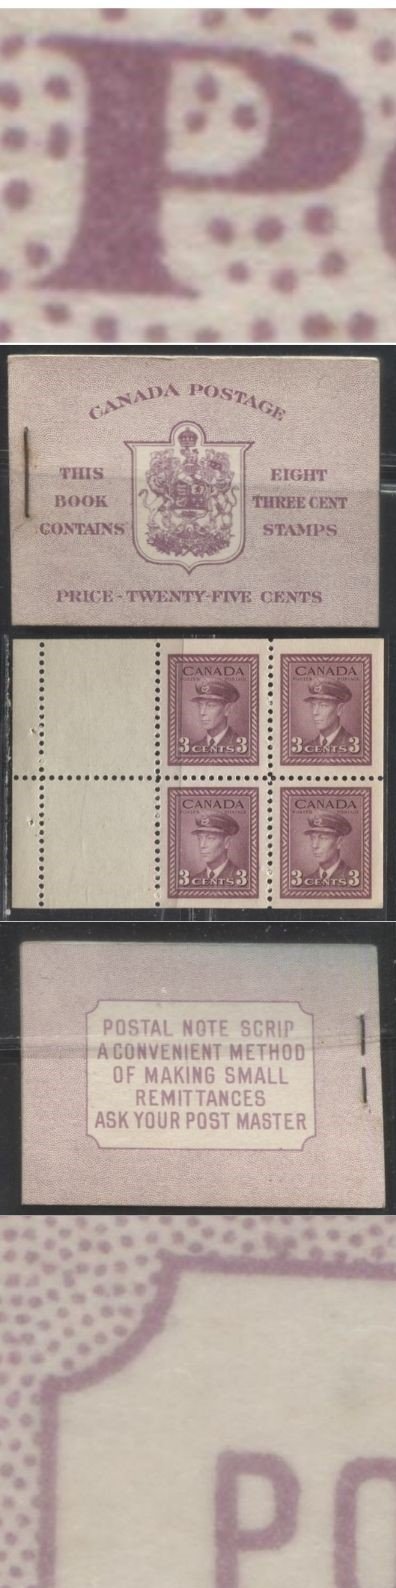 Lot 276 Canada #BK35c 1942-1949 War Issue, Complete 25¢ English Booklet, 2 Panes of 3c Rosy Plum, Smooth Vertical Wove Paper, Harris Front Cover Type IIf, Back Cover Type Cbi, 7c and 6c Airmail Rate Page